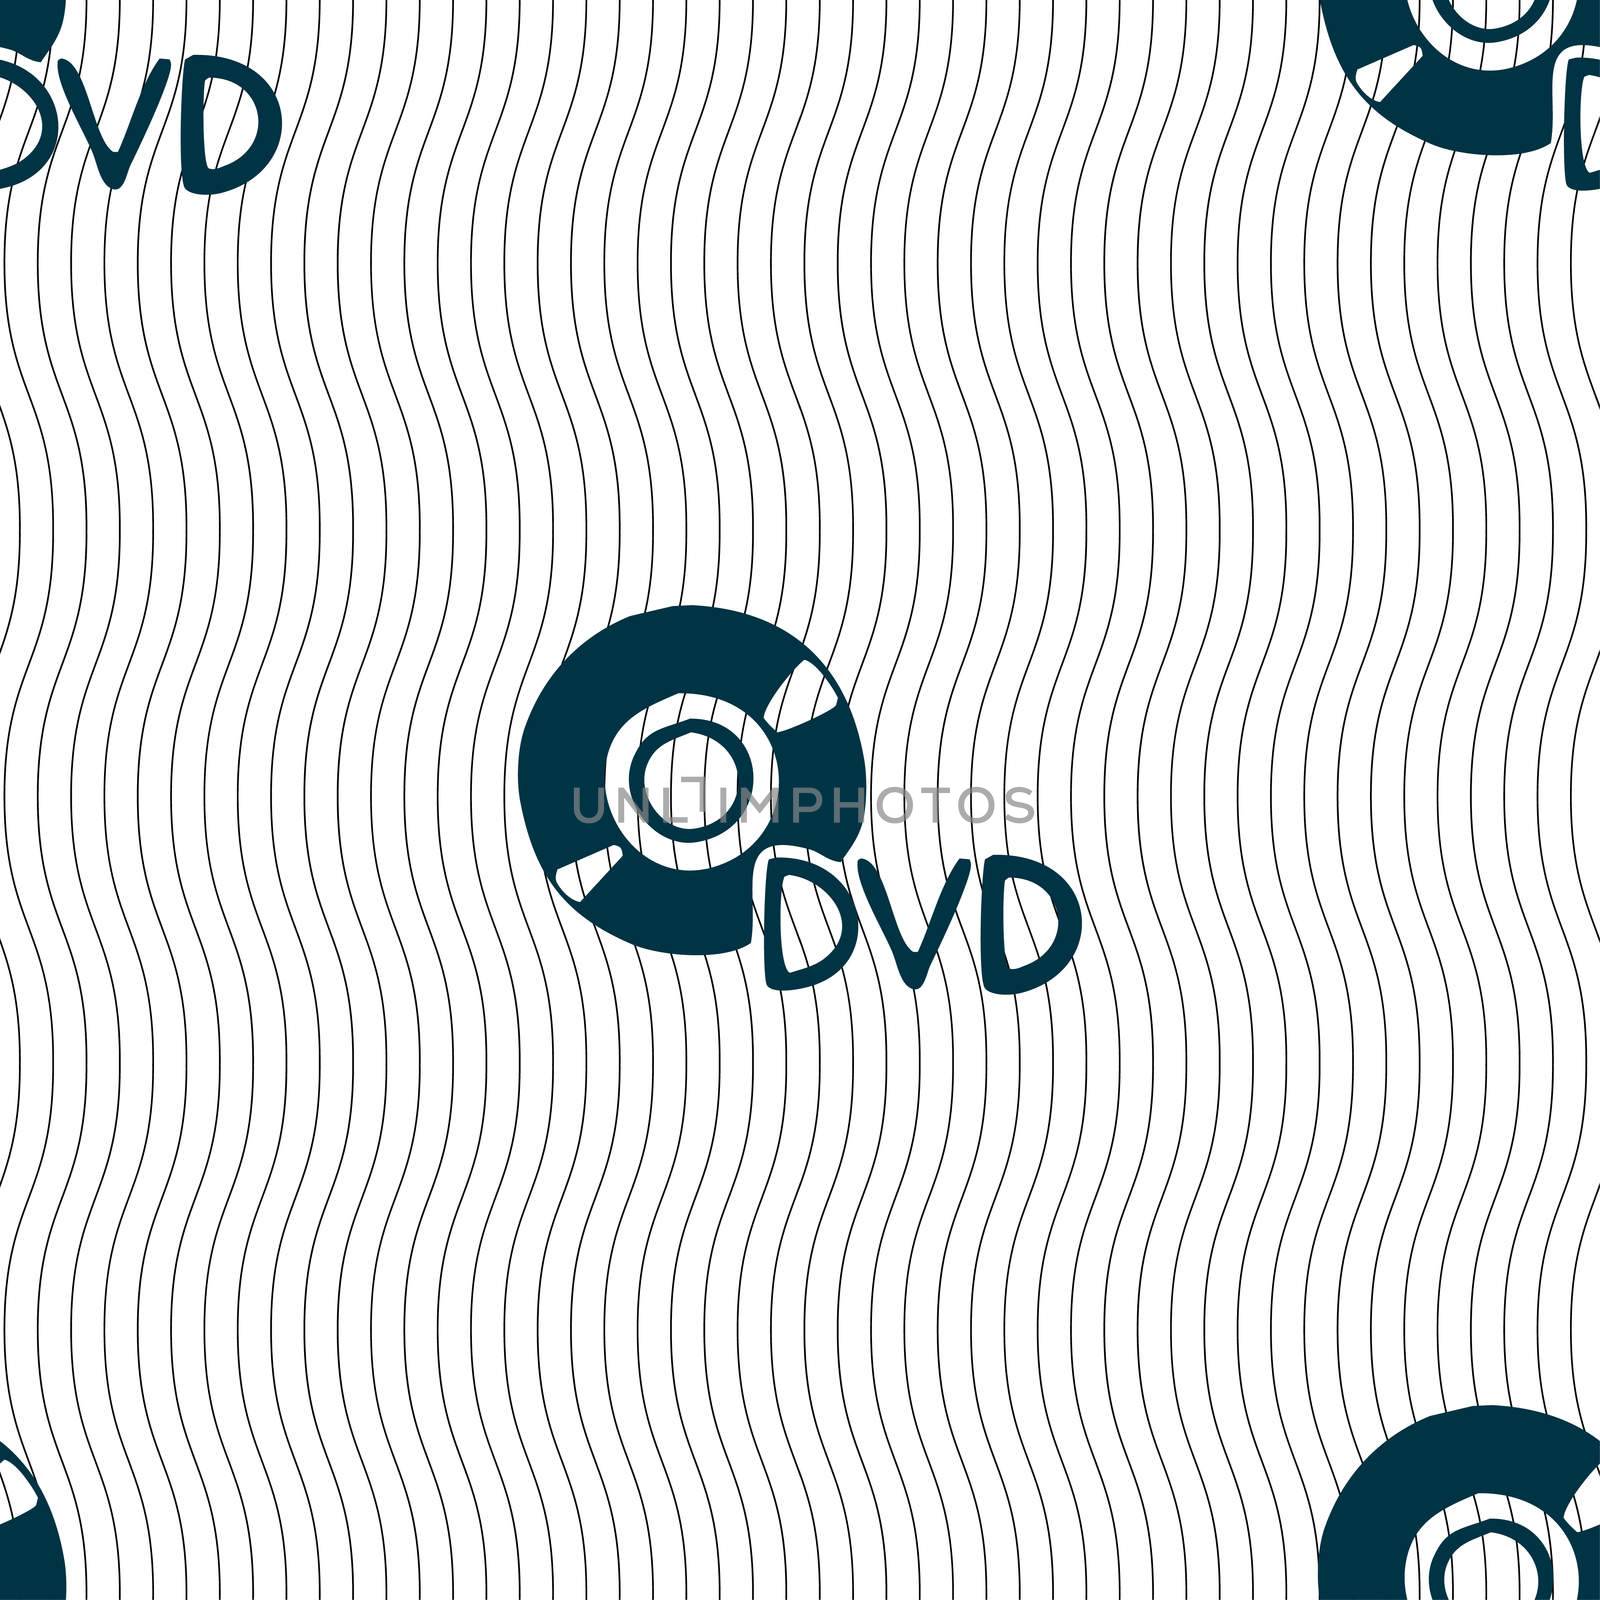 dvd icon sign. Seamless pattern with geometric texture.  by serhii_lohvyniuk